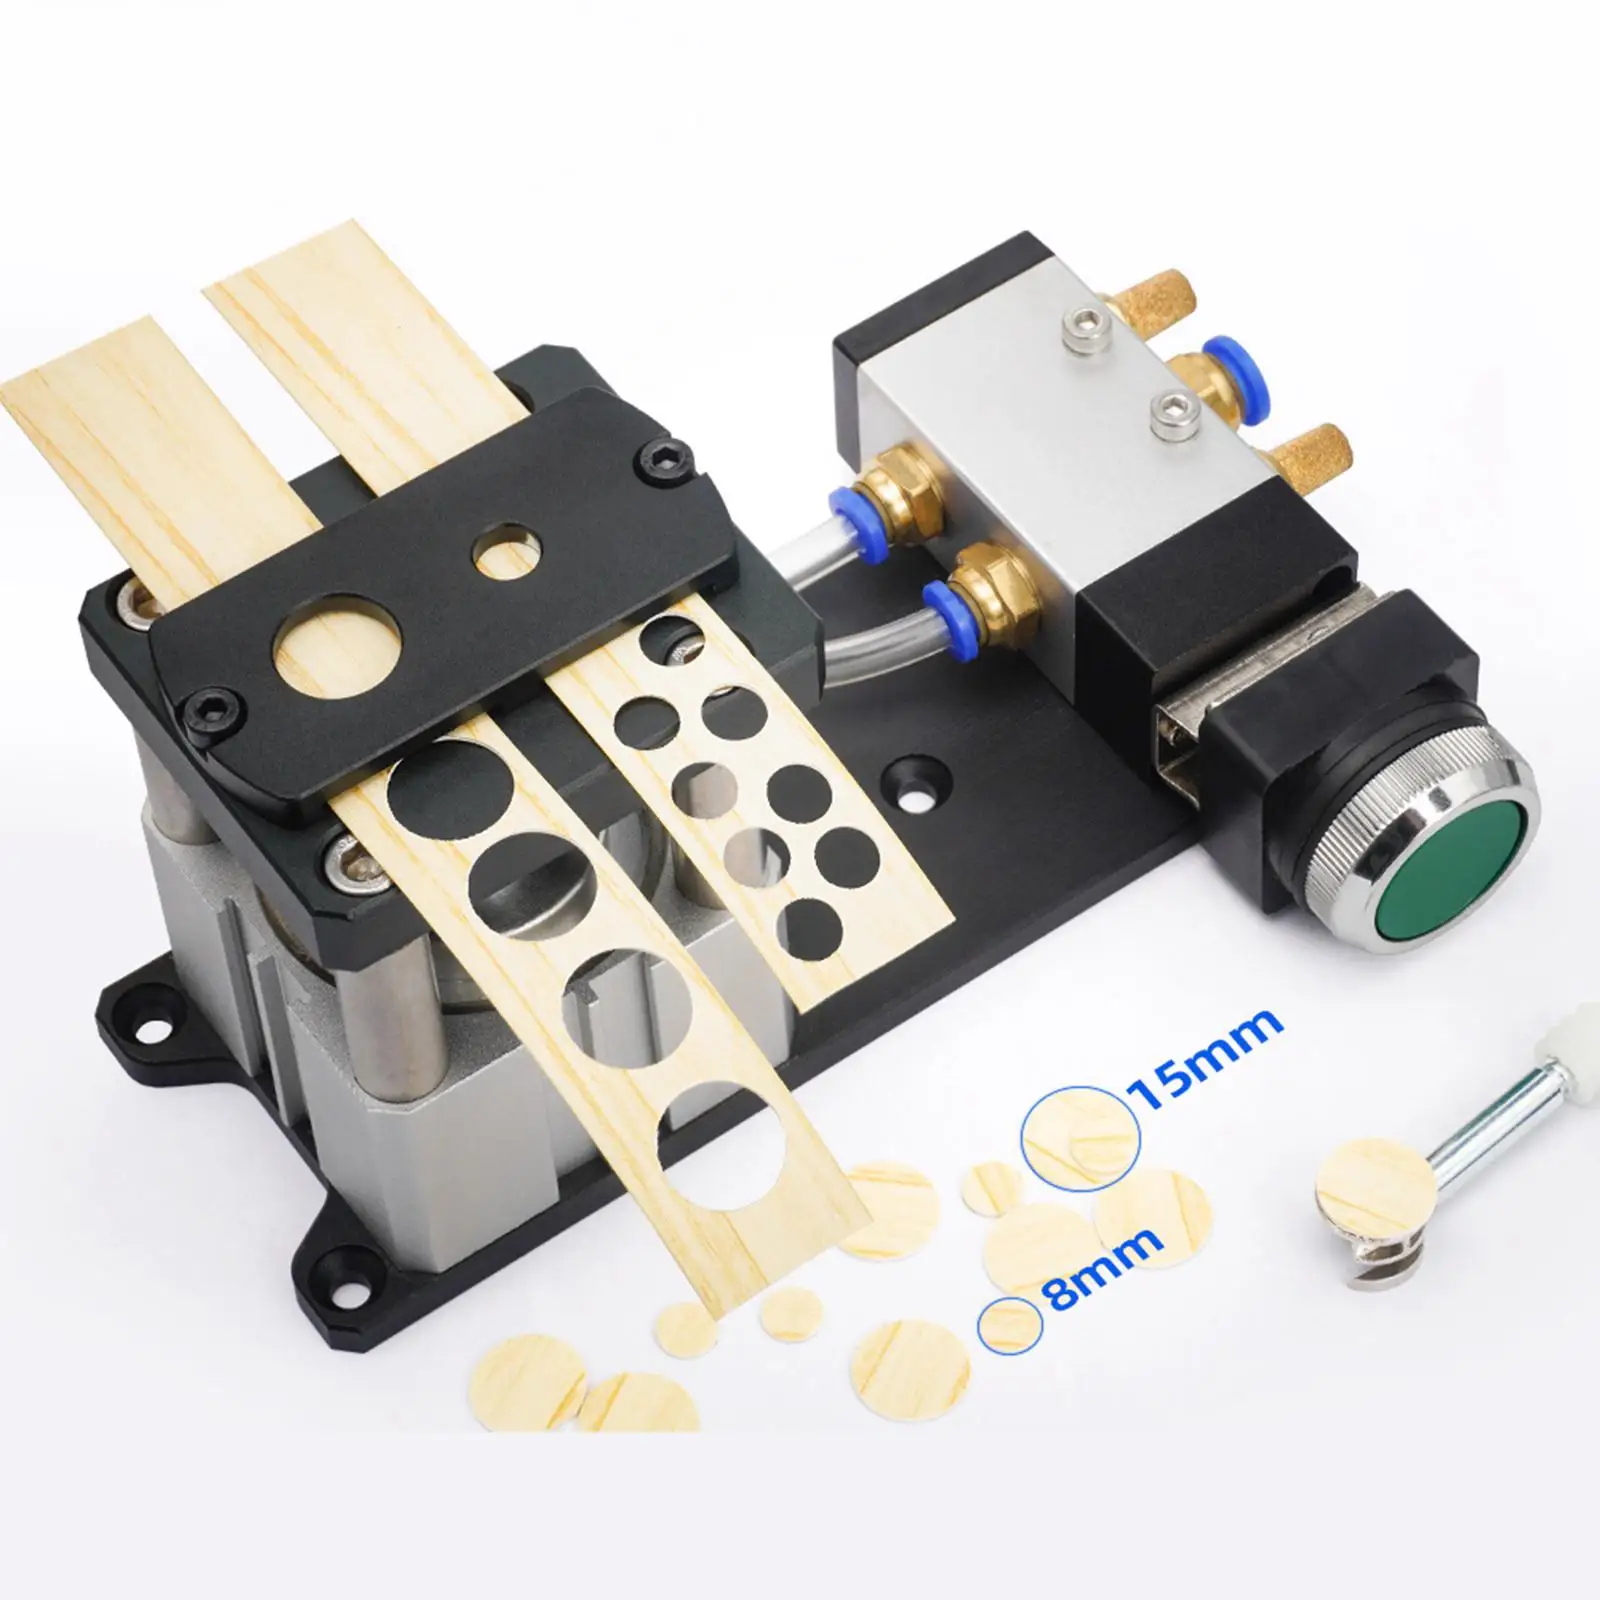 Aluminum Alloy 8mm 15mm Pneumatic Edge Banding Punching Hole Machine Durable Simple to Use Edge Bander Accessories Efficient